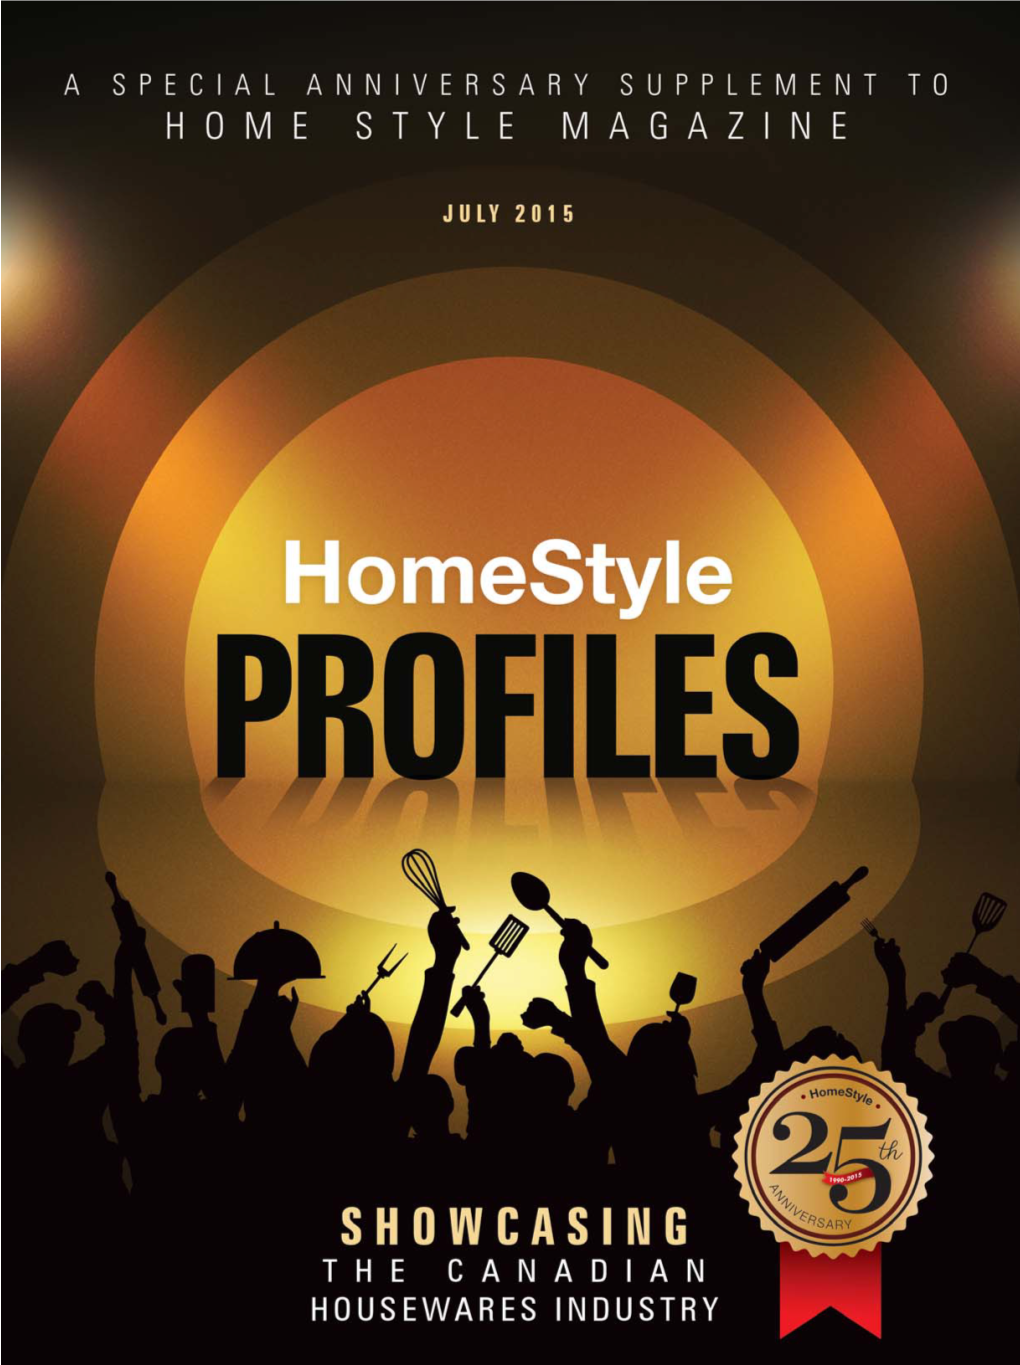 Home Style Magazine, July 2015 Supplement